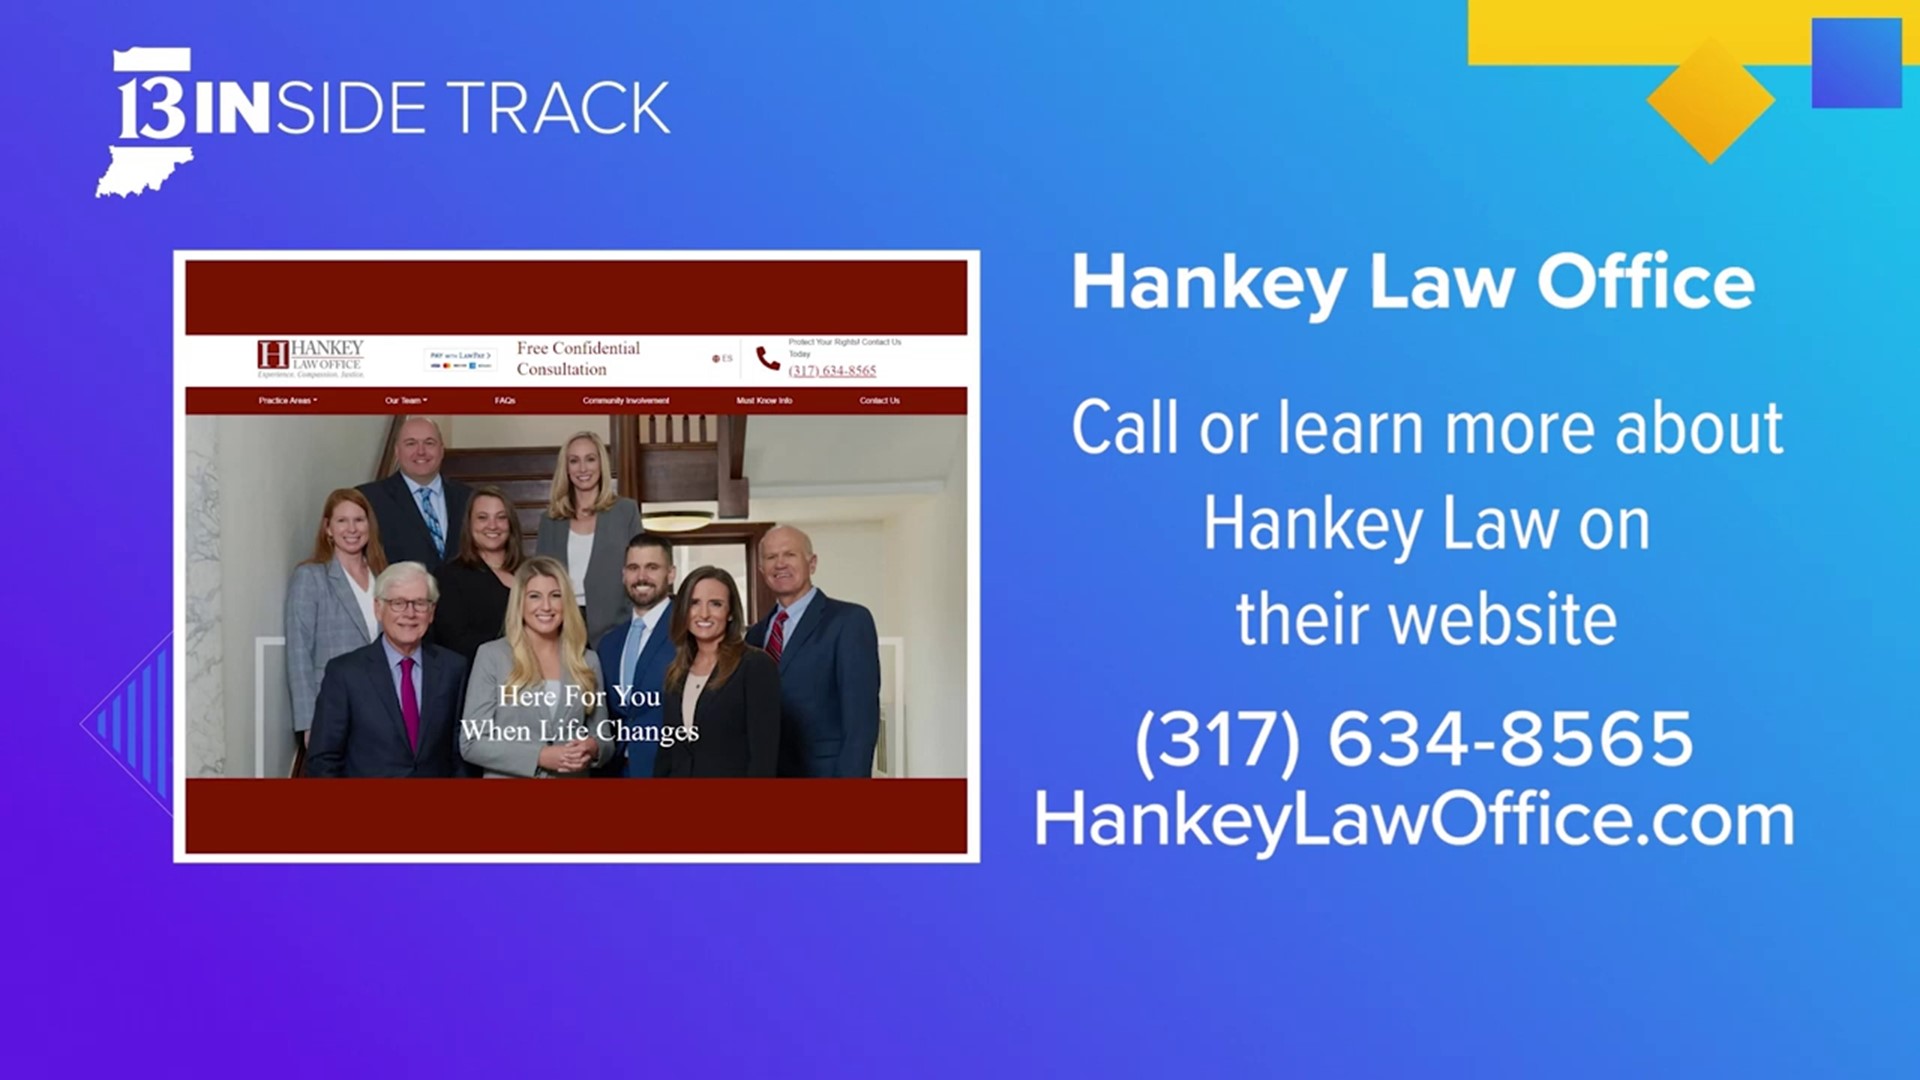 Hankey Law offers resources for individuals needed to apply, appeal, or have questions about social security.